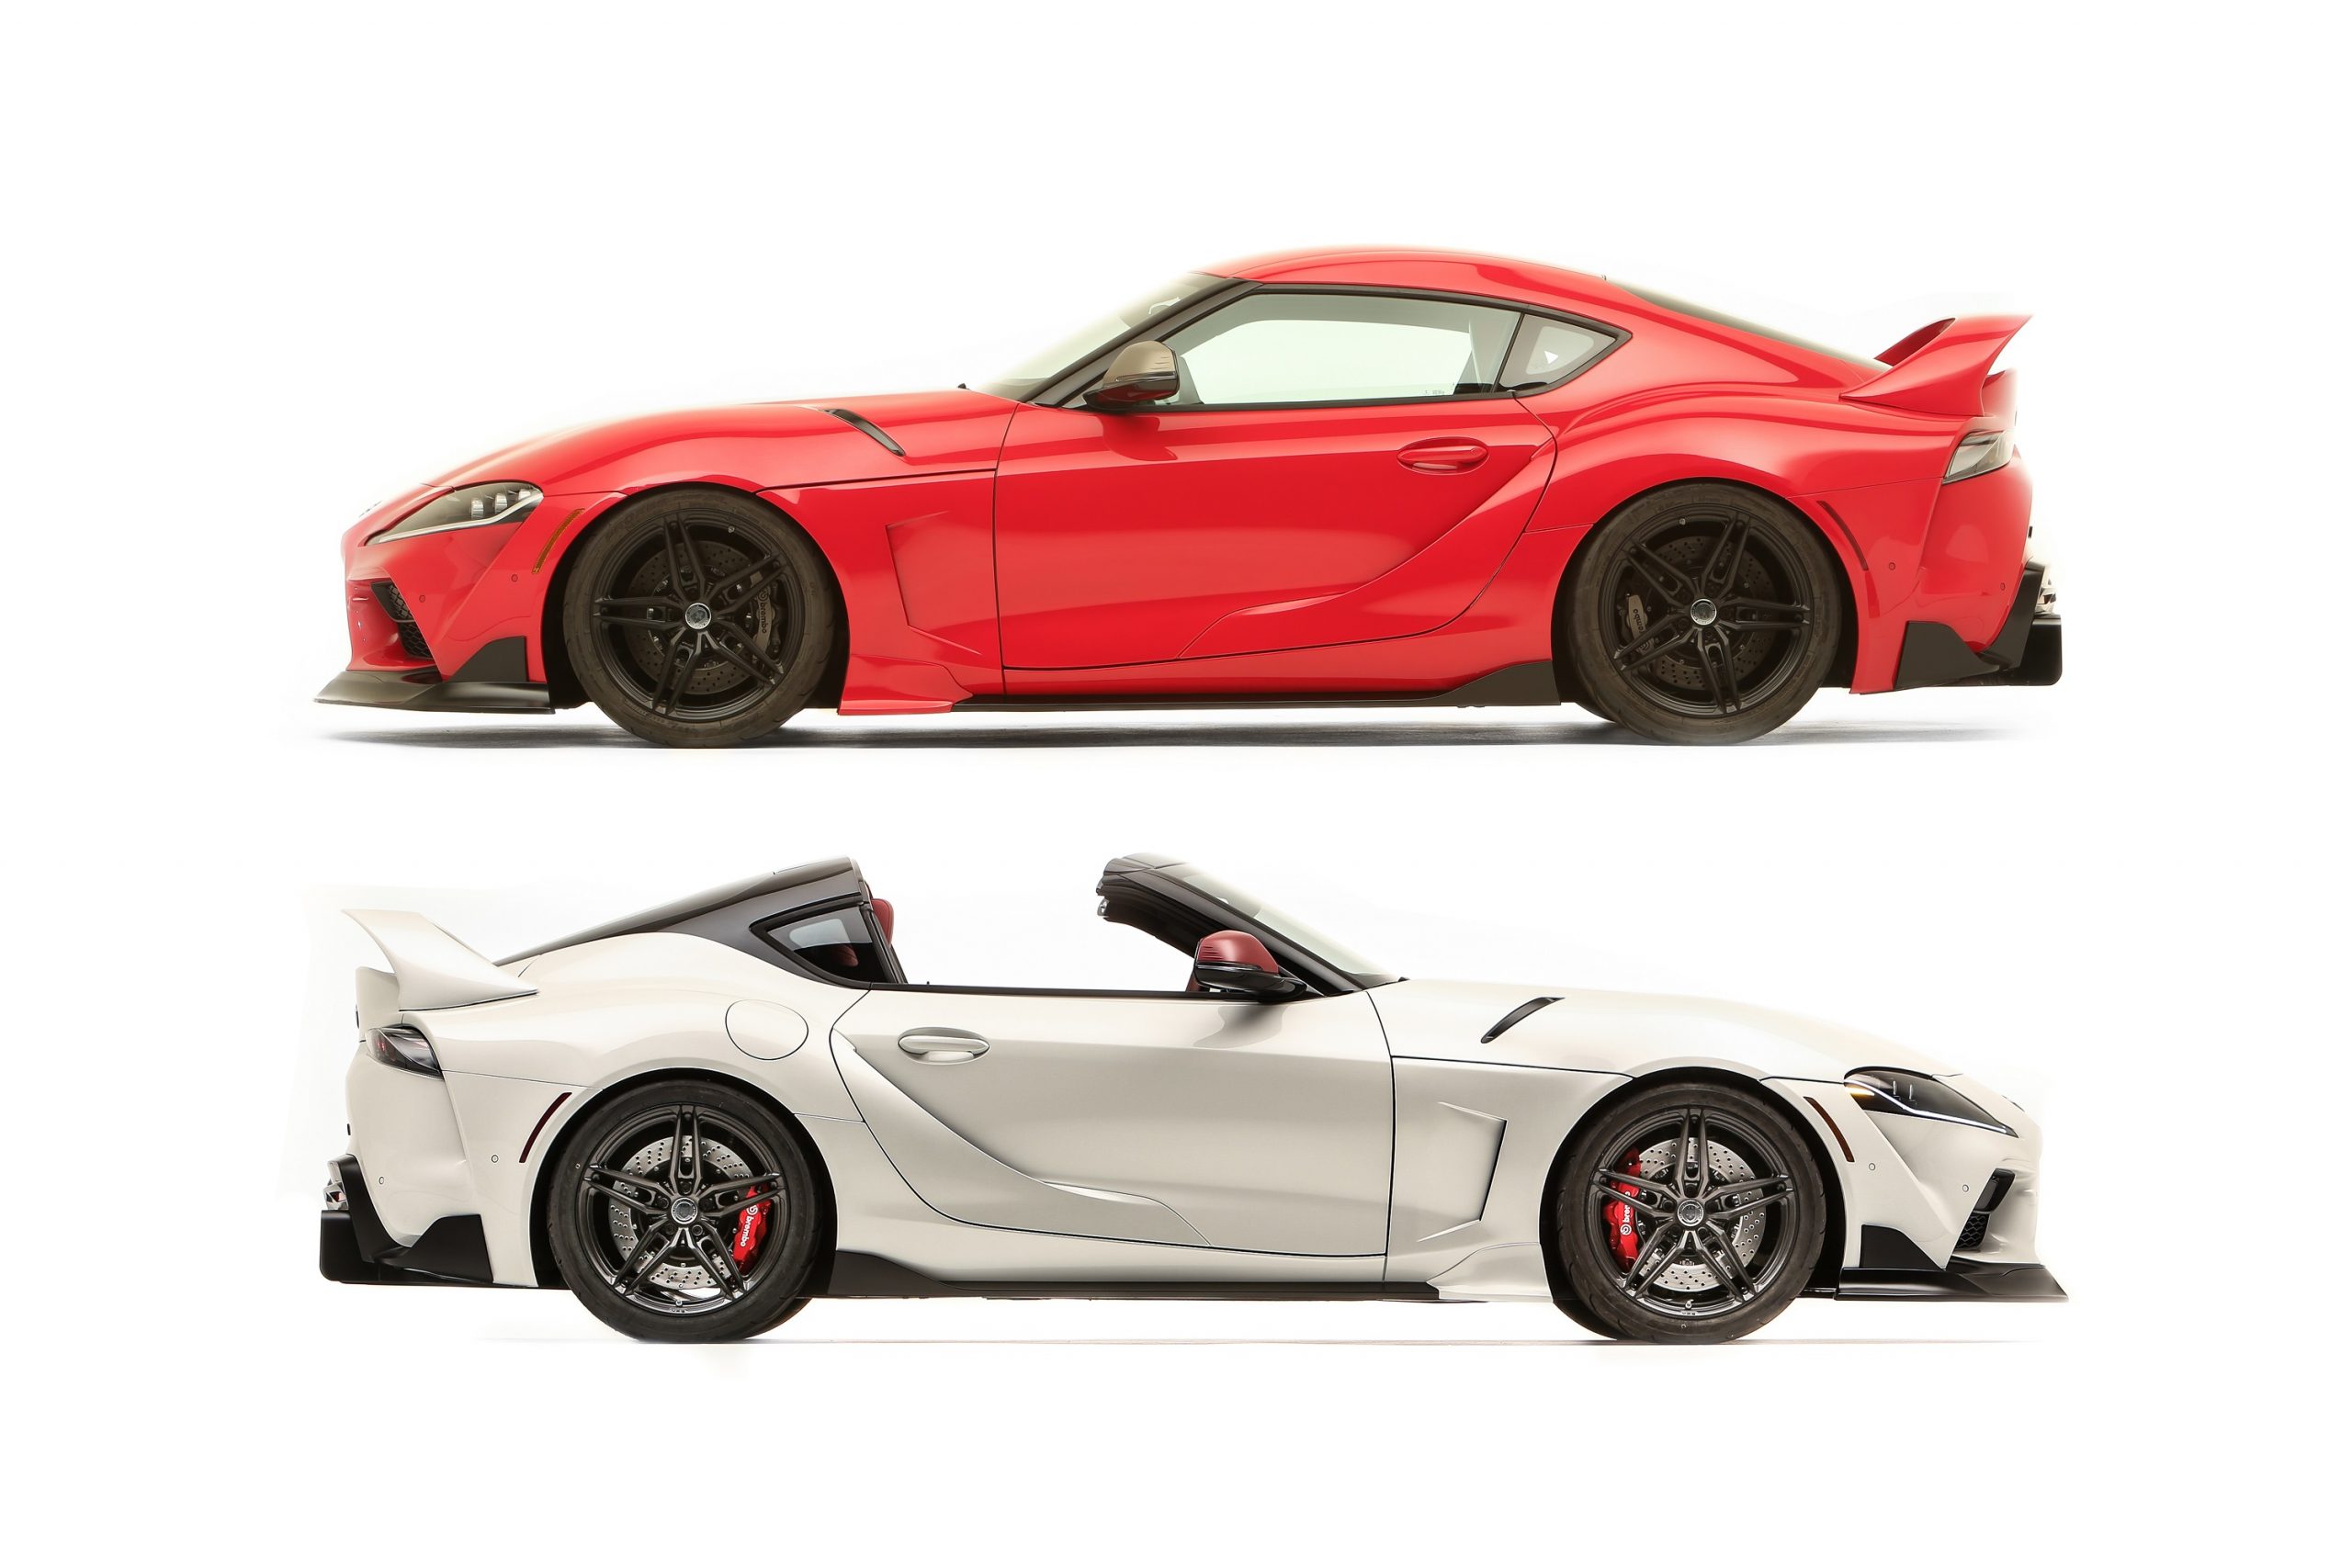 The Toyota Supra Heritage edition with Targa top in white and red, premiering at SEMA 2021